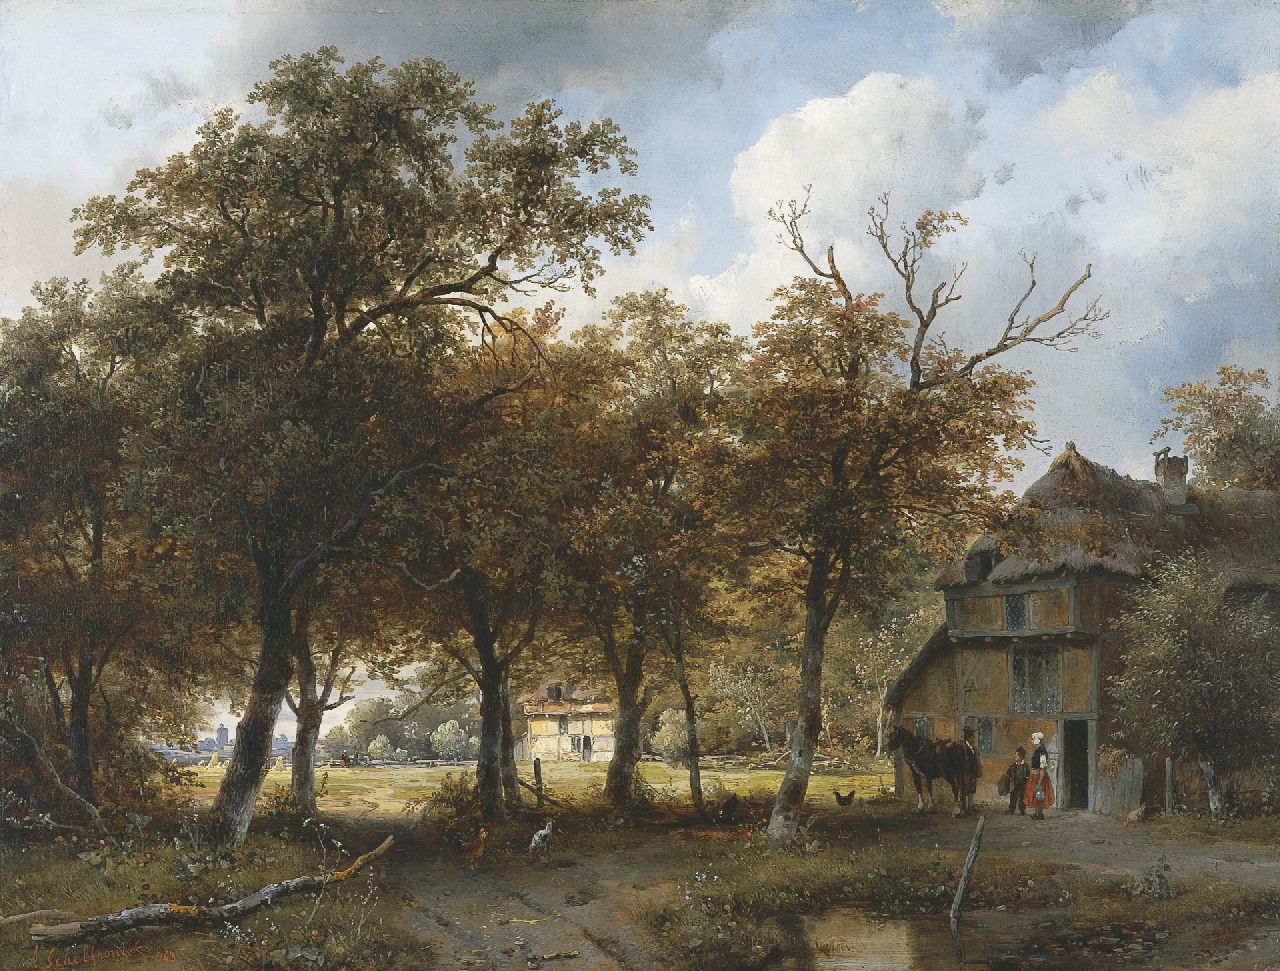 Schelfhout A.  | Andreas Schelfhout, A wooded landscape with farms and a city in the distance, oil on panel 40.3 x 52.9 cm, signed l.l. and painted 1843